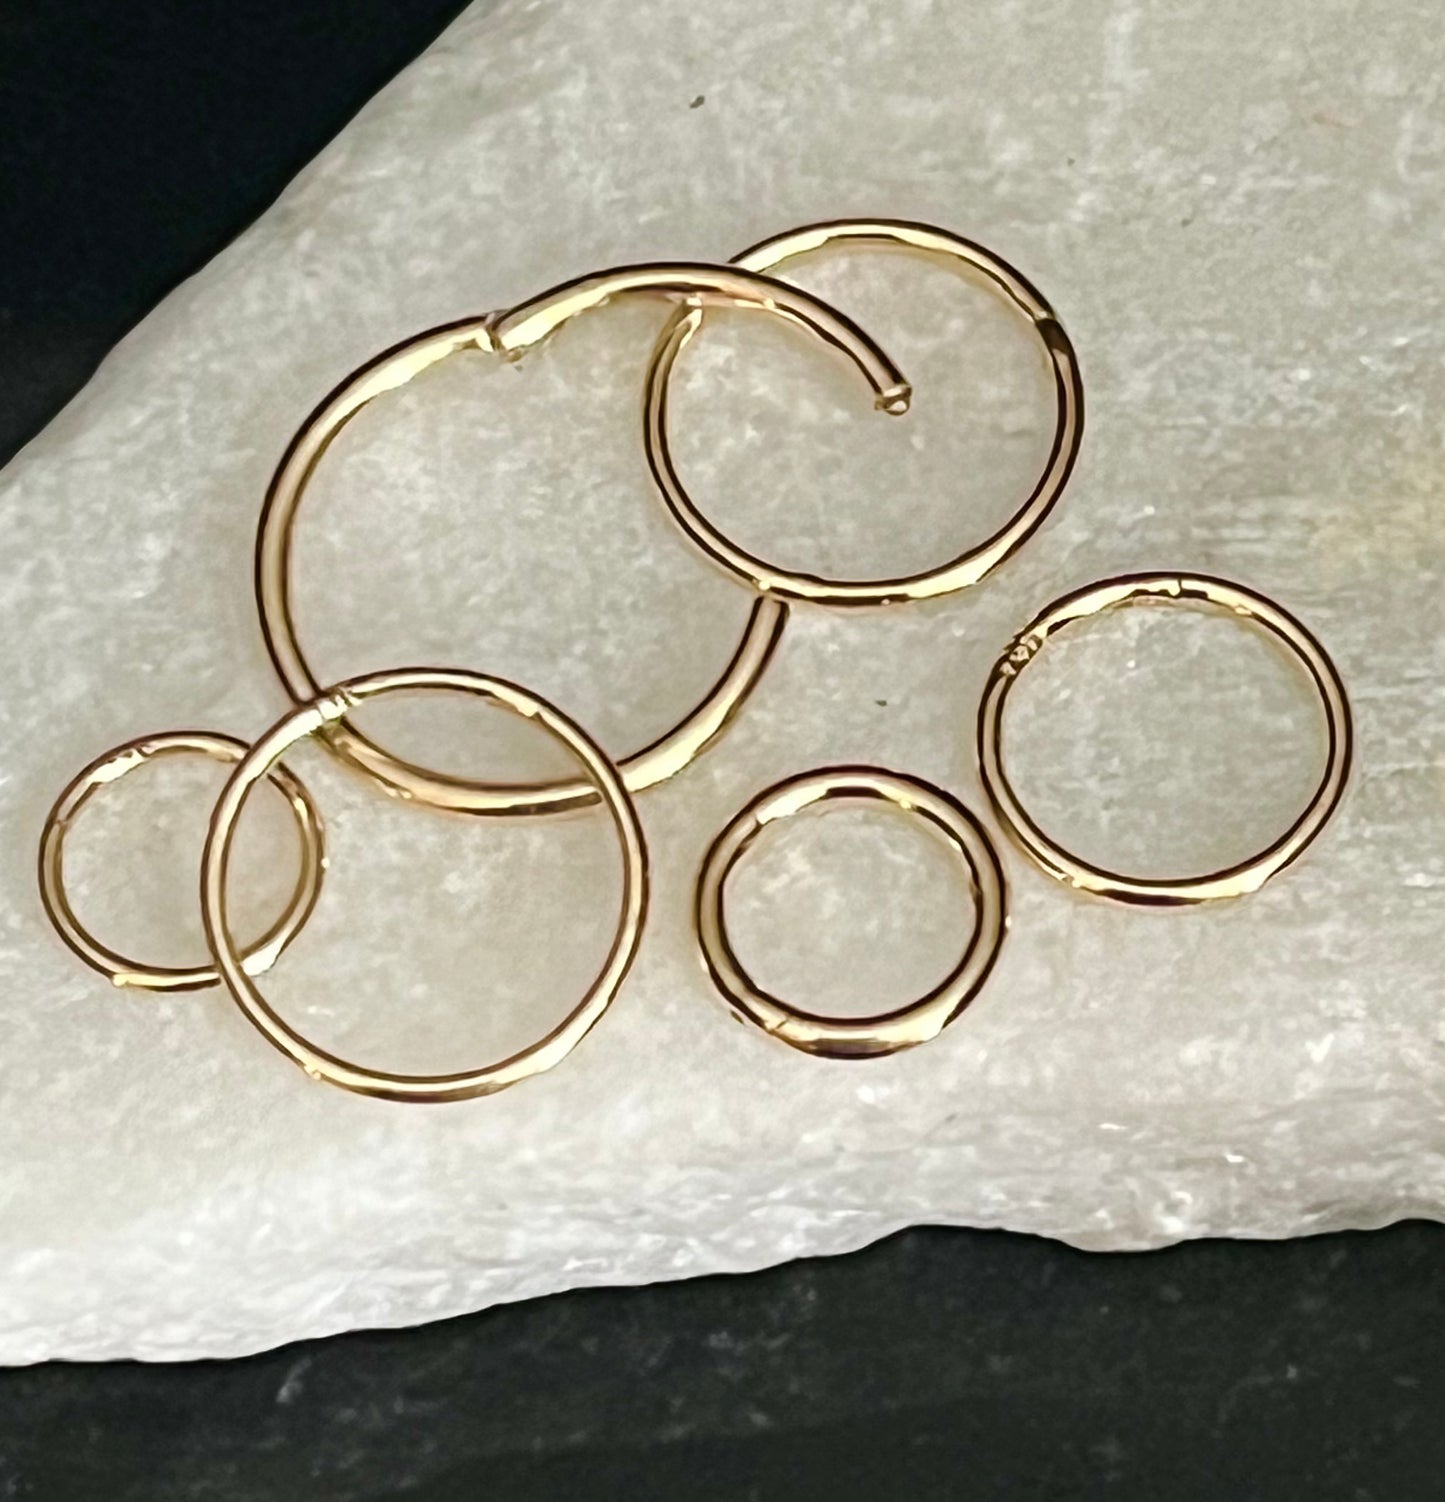 1pc Solid 14kt Gold Hinged Segment Ring Septum Nose Ring Helix Cartilage Clicker